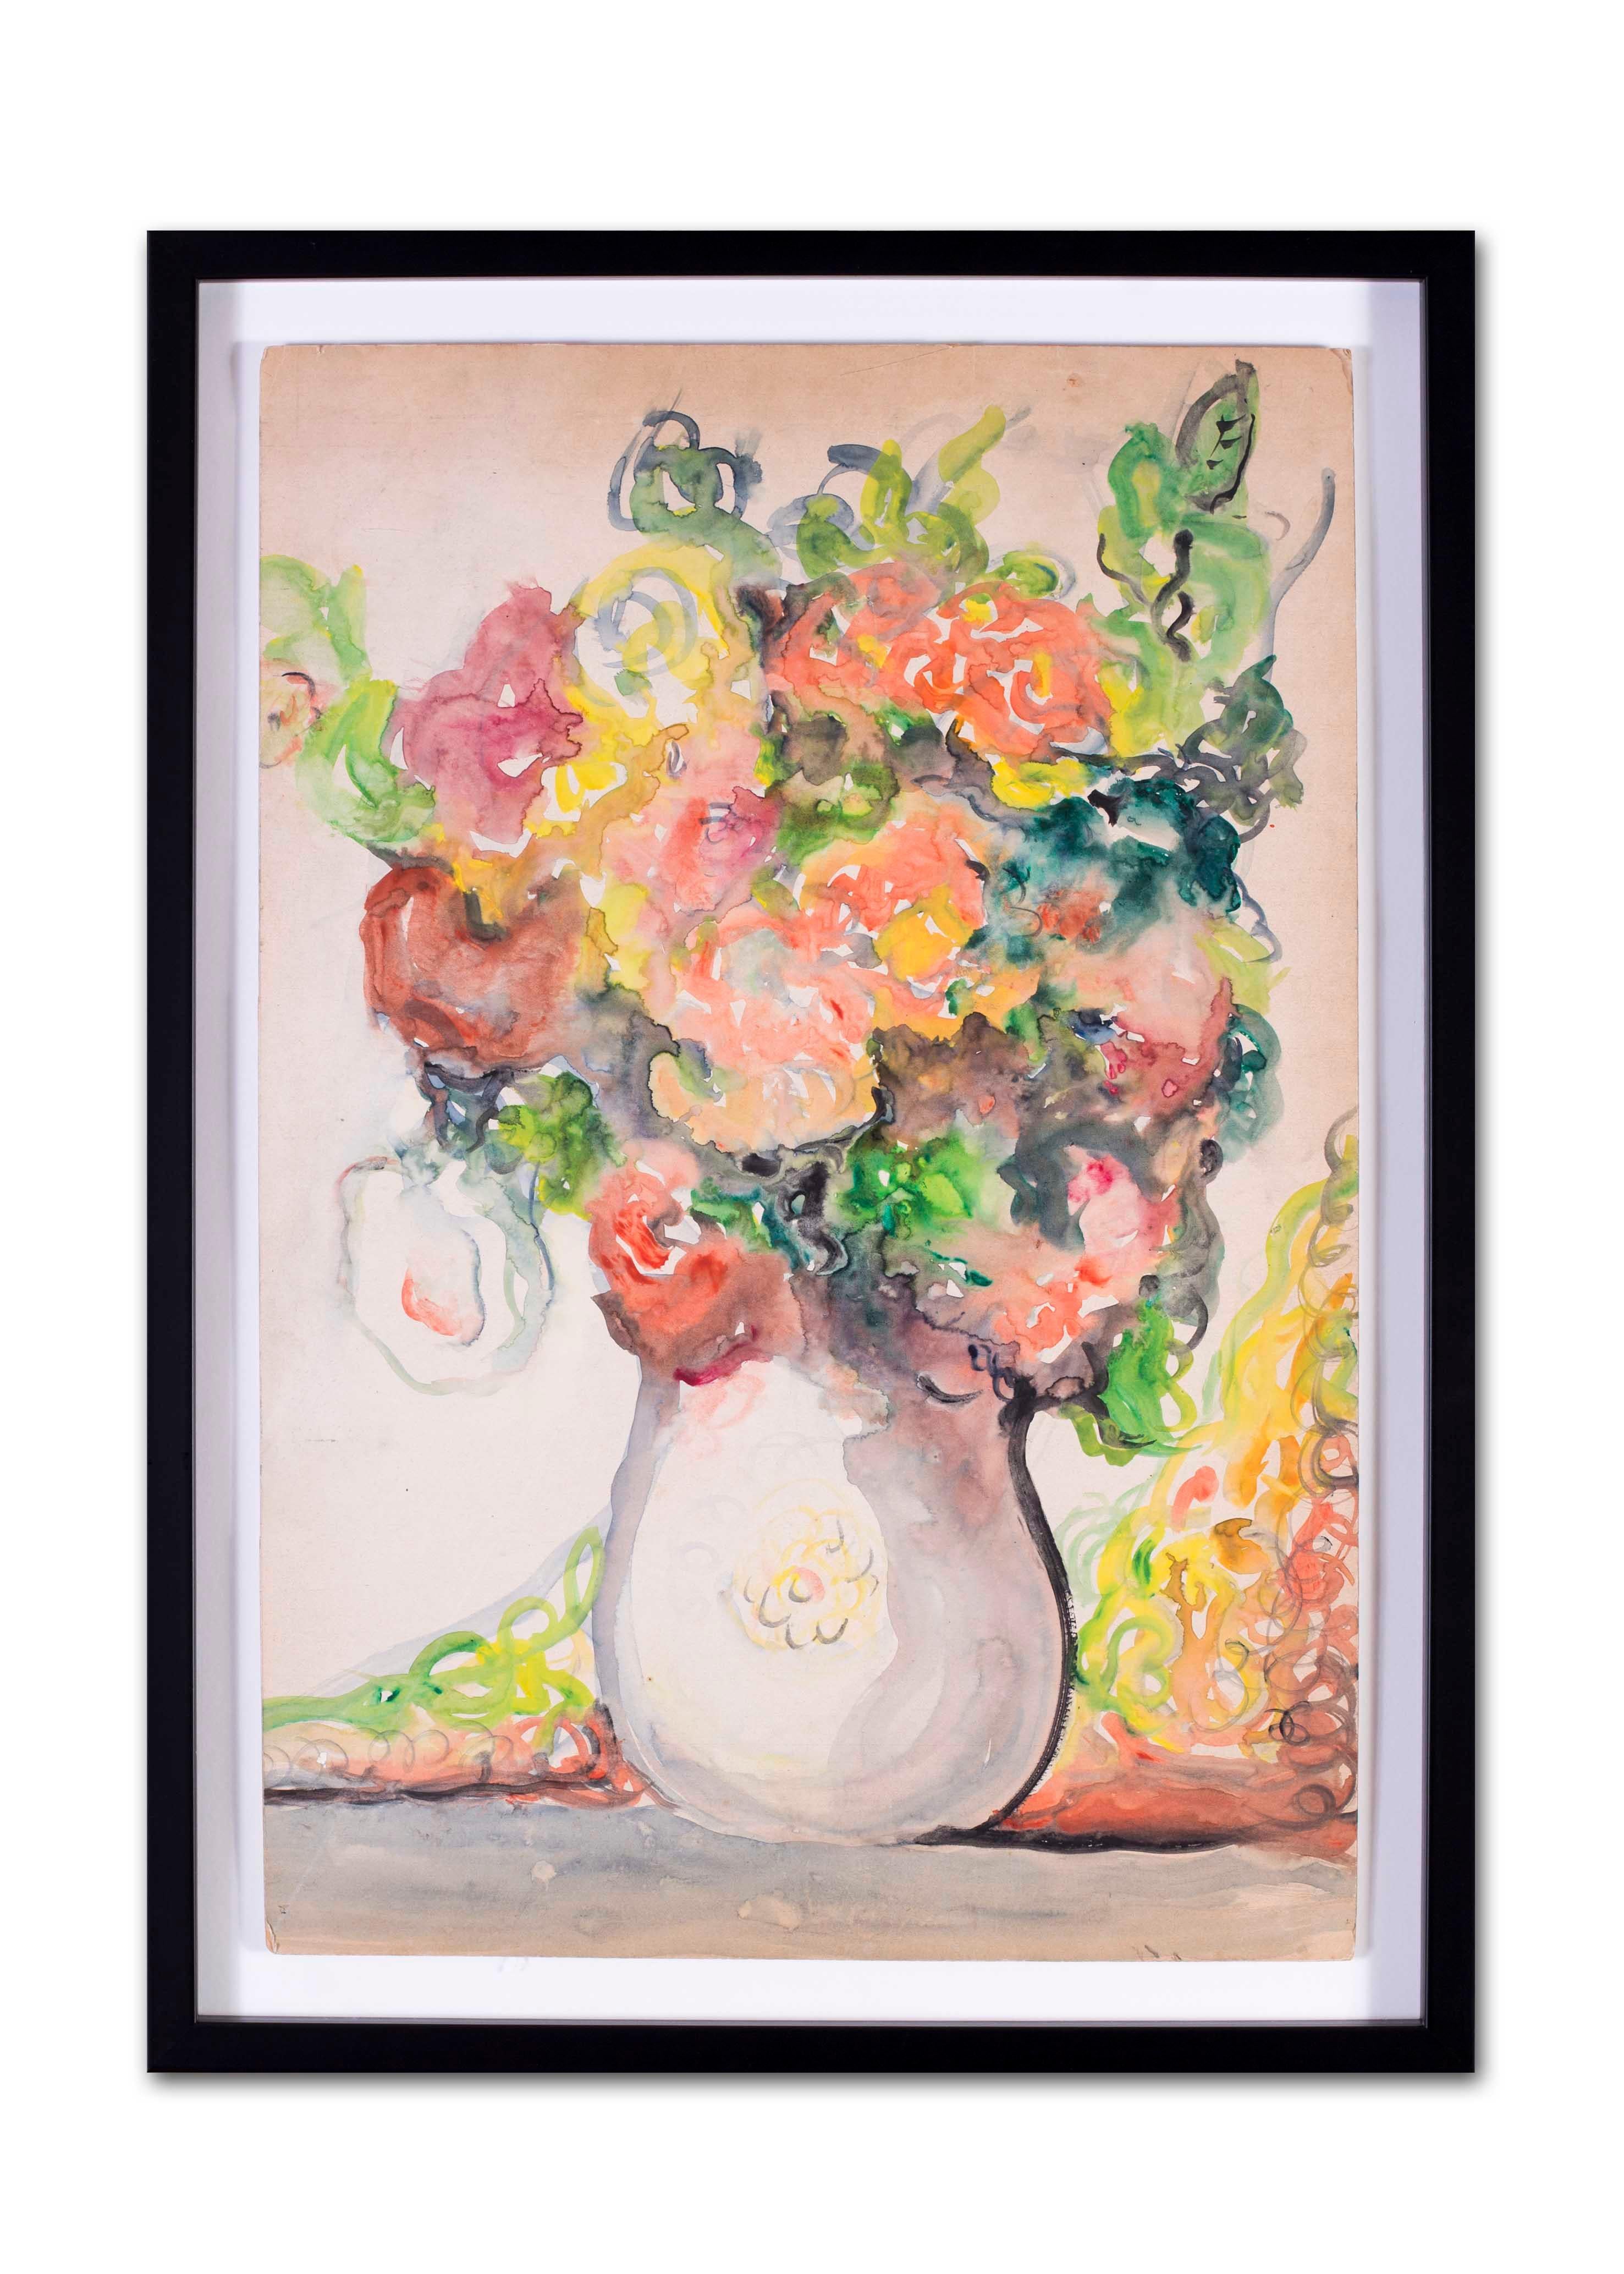 Derrick Latimer Sayer (British, 1917 – 1992)
A vase of summer blooms
Watercolour on board
24.3/4 x 16.3/4 in. (60.3 x 42.5 cm.)
Sayer studied at the Chelsea School Art under Henry Moore and Graham Sutherland.  He spent time in Ben Nicholson’s studio